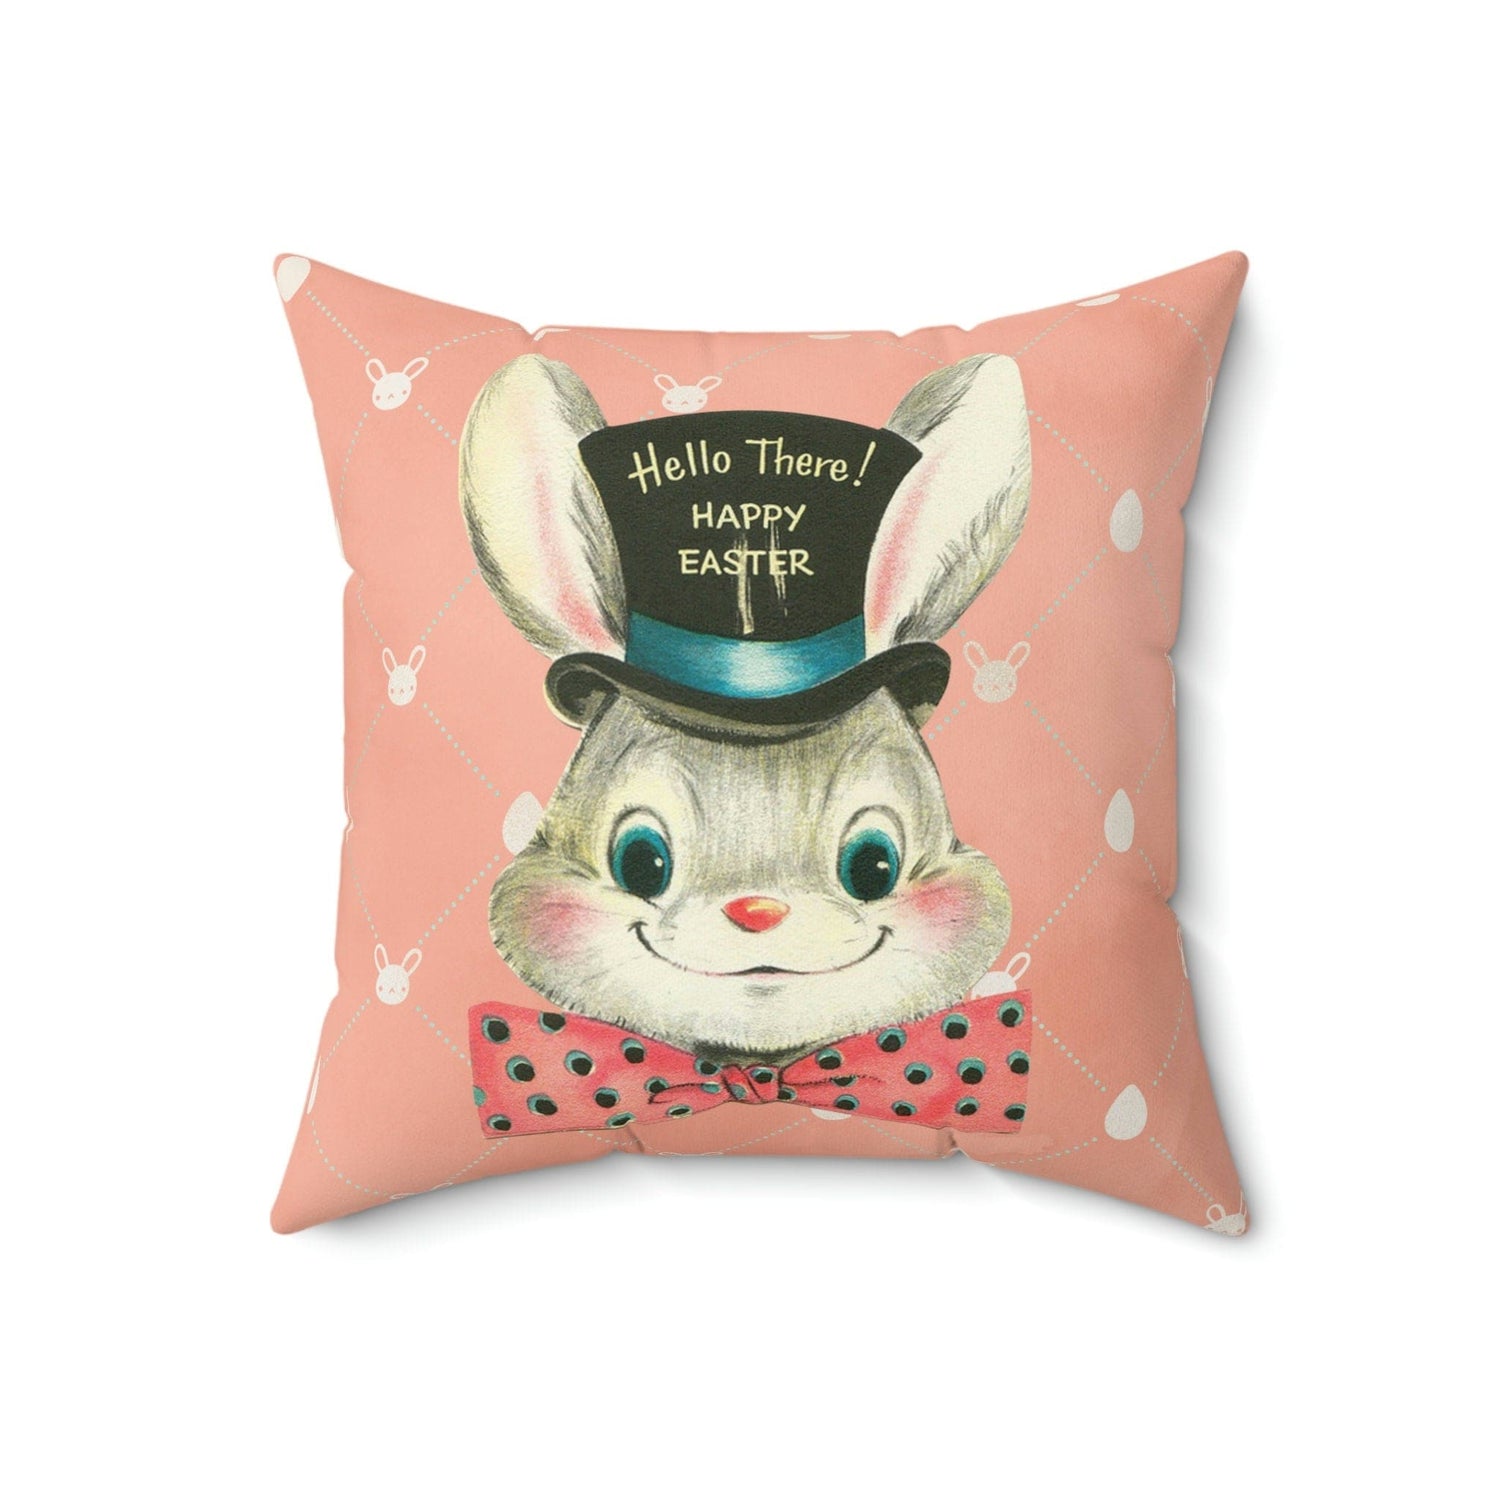 Kate McEnroe New York Retro Kitschy Vintage Easter Card Inspired Art Throw Pillow Cover Throw Pillow Covers